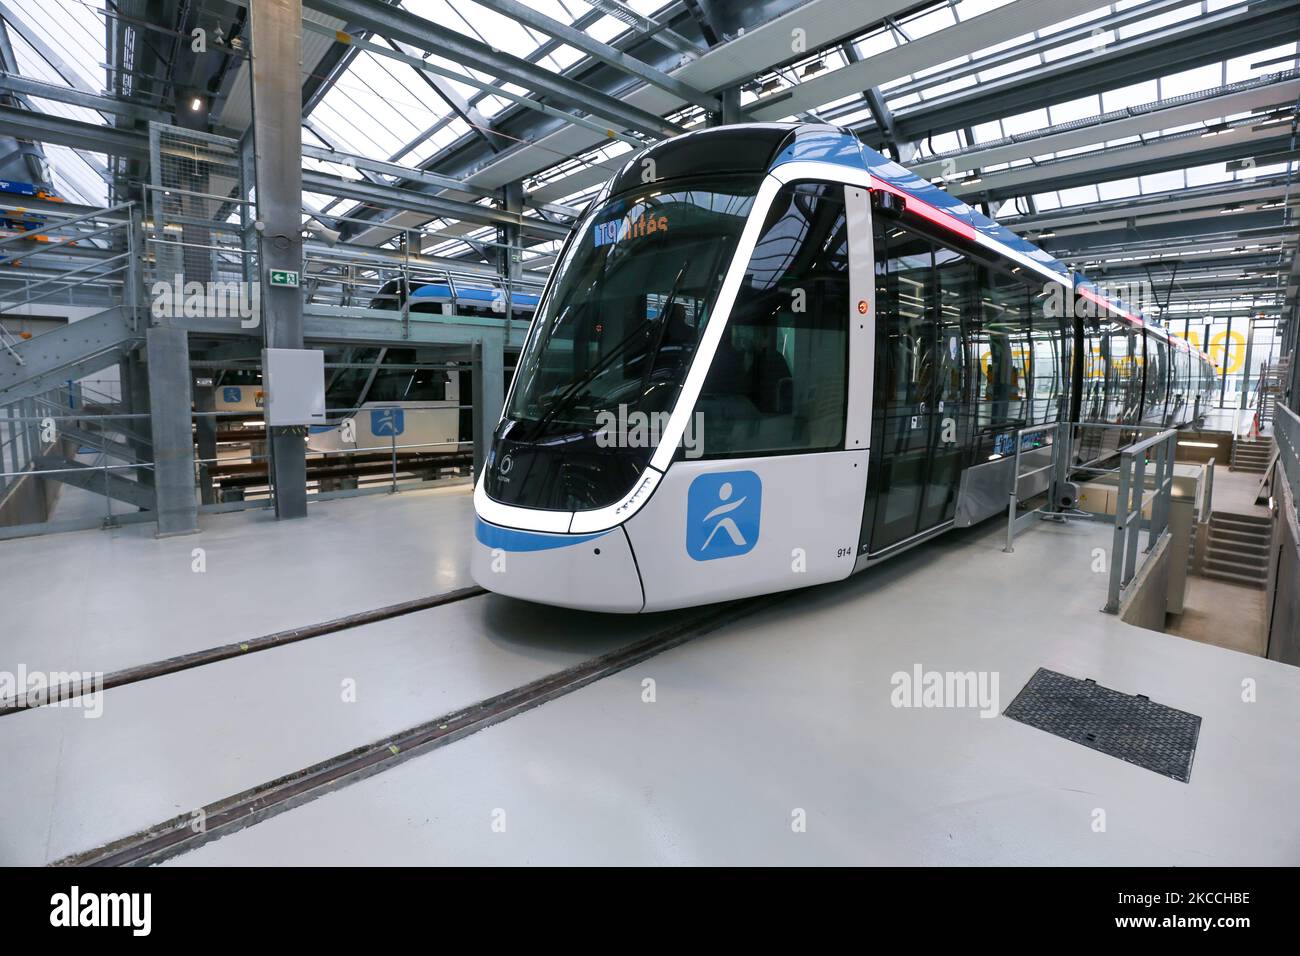 The new tramway train on the opening day of the T9 tram line between Porte de Choisy and Orly City in Paris, France, on April 10, 2021. Line T9 connects Porte de Choisy Paris Metro station and the centre of Orly (Place Gaston Viens) serving suburbs in the south-east of Paris. Line T9 will not serve Orly Airport though which is currently served by line T7. The line will have a length of approximately 10 km (6.2 mi) and 19 stations. (Photo by Michel Stoupak/NurPhoto) Stock Photo